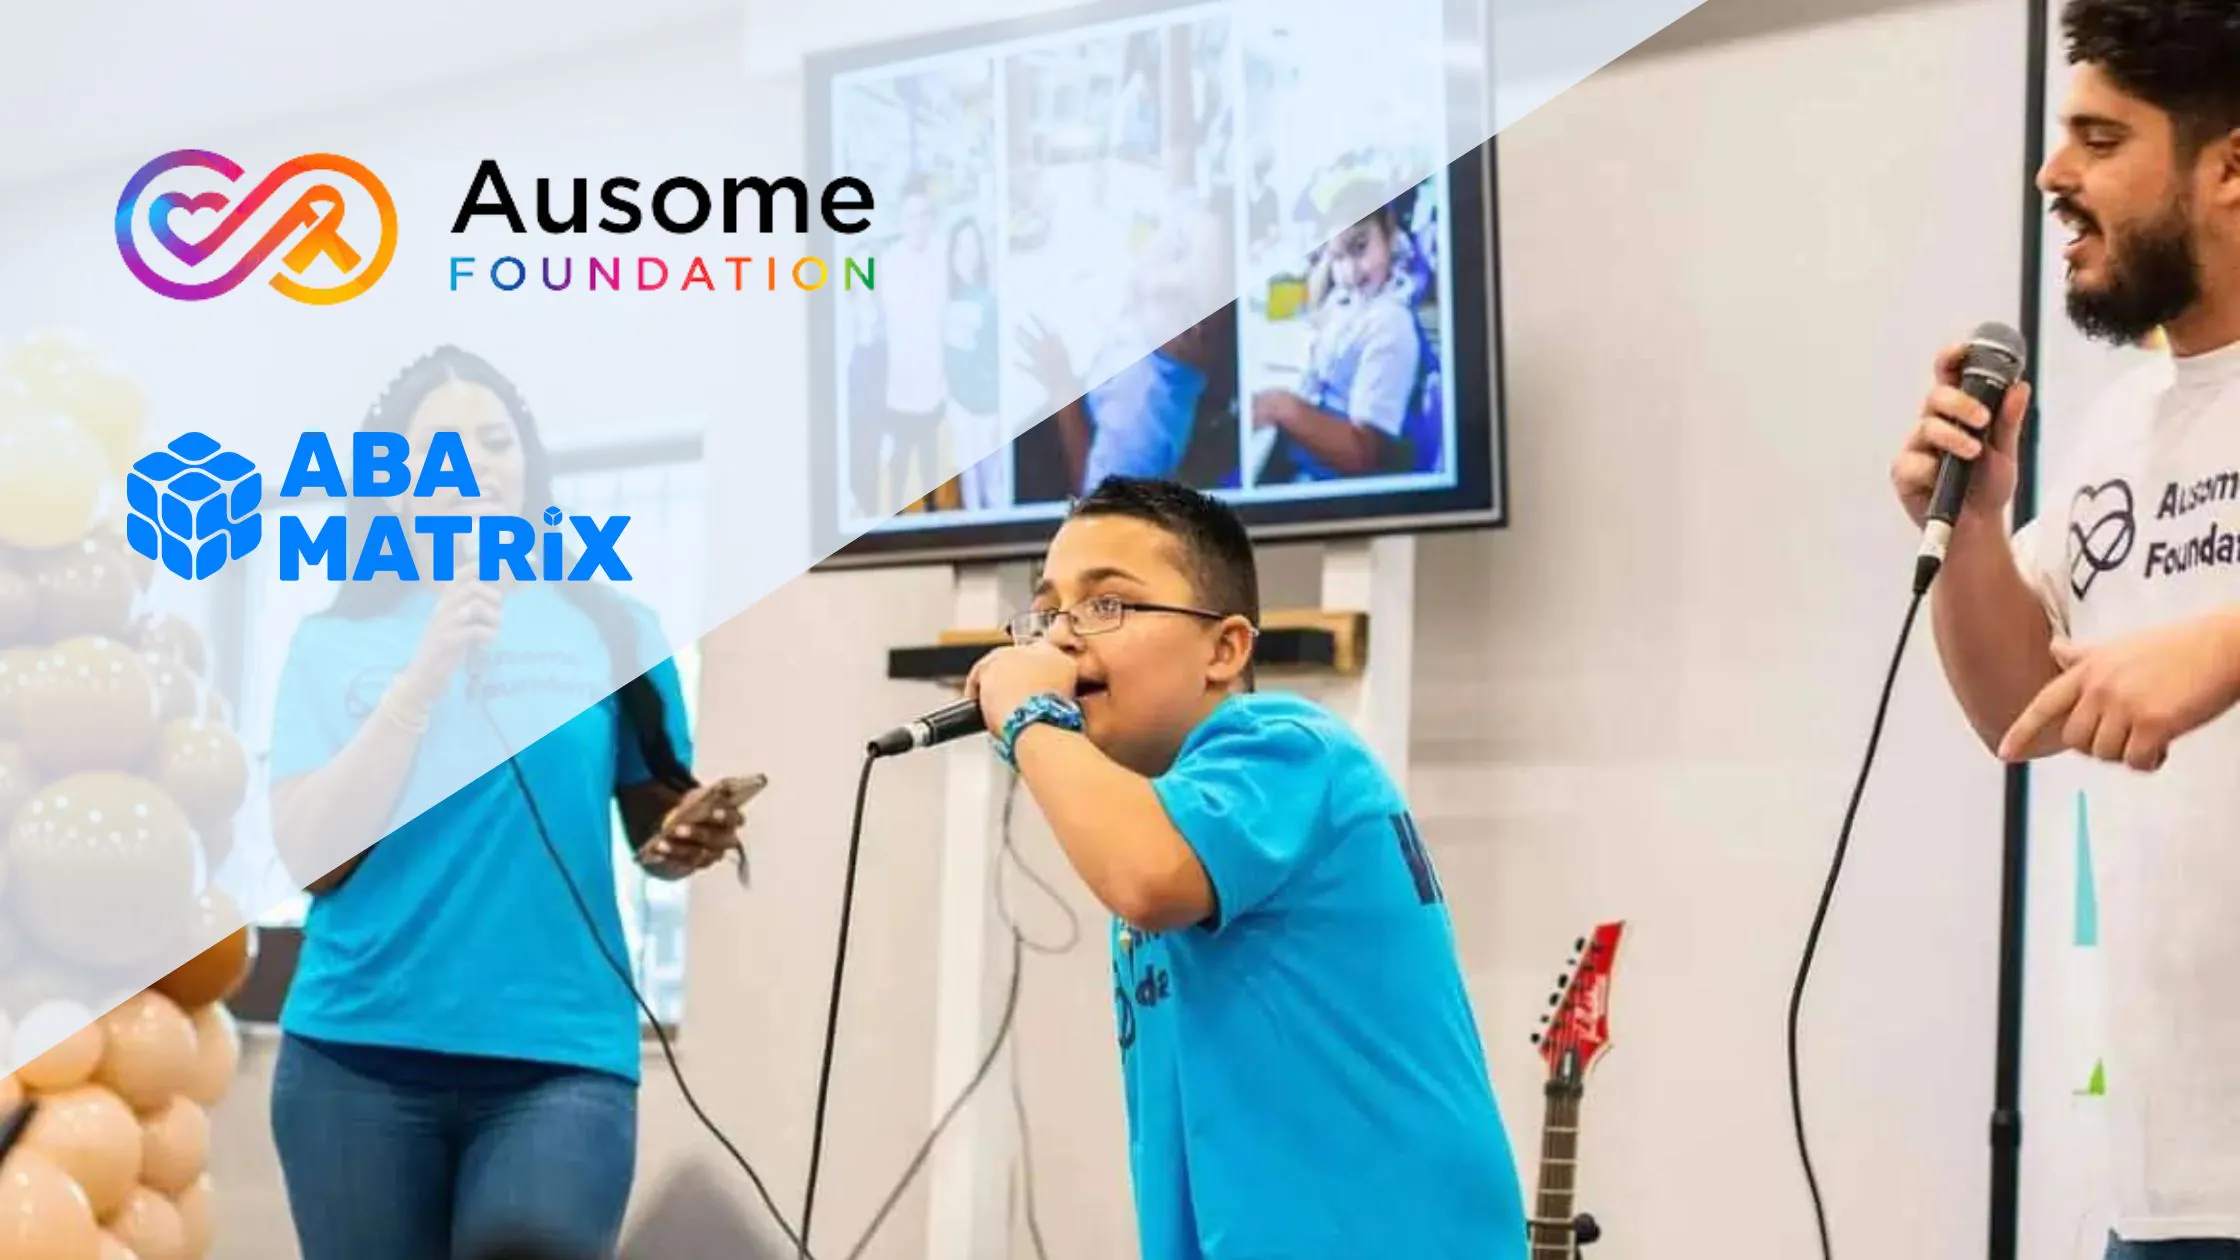 The Ausome Foundation is an organization that supports children with autism and their families. ABA Matrix is proud to sponsor and help further its mission